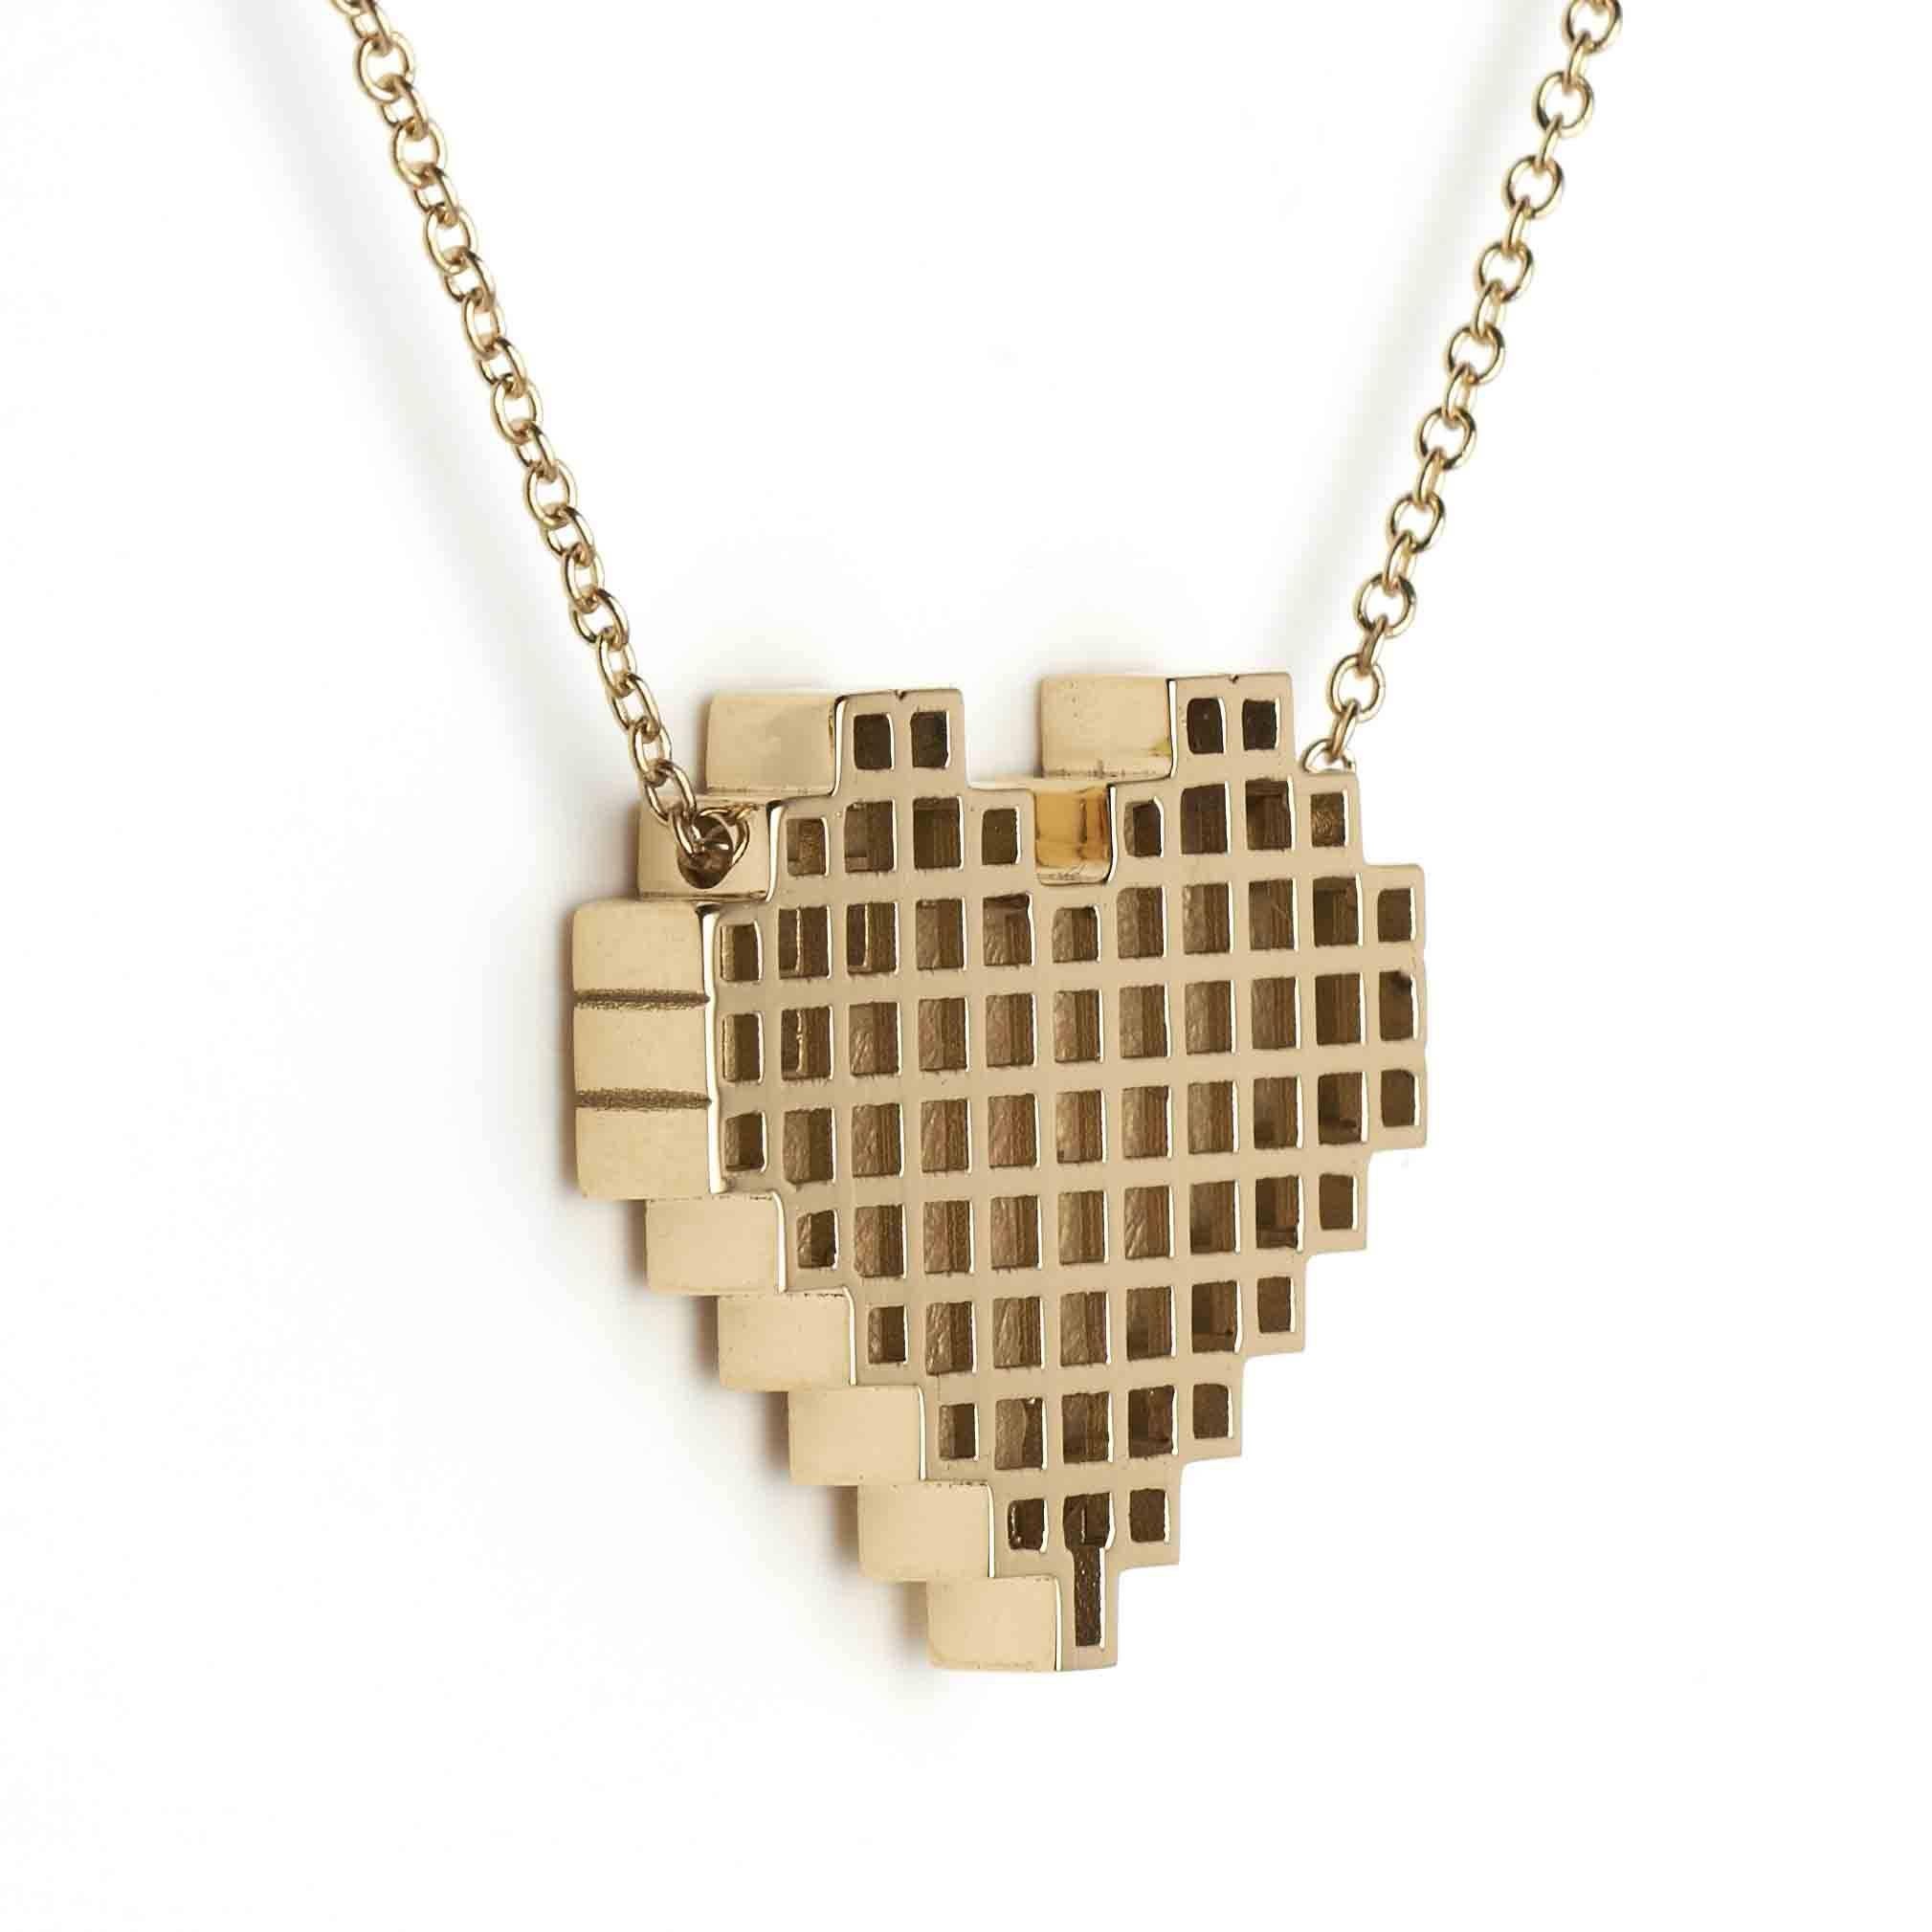 Yellow Gold and Diamond Pixel Heart Necklace by Francesca Grima 

18ct. Yellow Gold set with 3 Diamonds on Yellow Gold Chain.

・Polished 18ct. Yellow Gold
・3 Princess-cut Diamonds (0.05cts)
・Pendant length: 2cm
・Pendant width; 2.1cm
・Chain can be